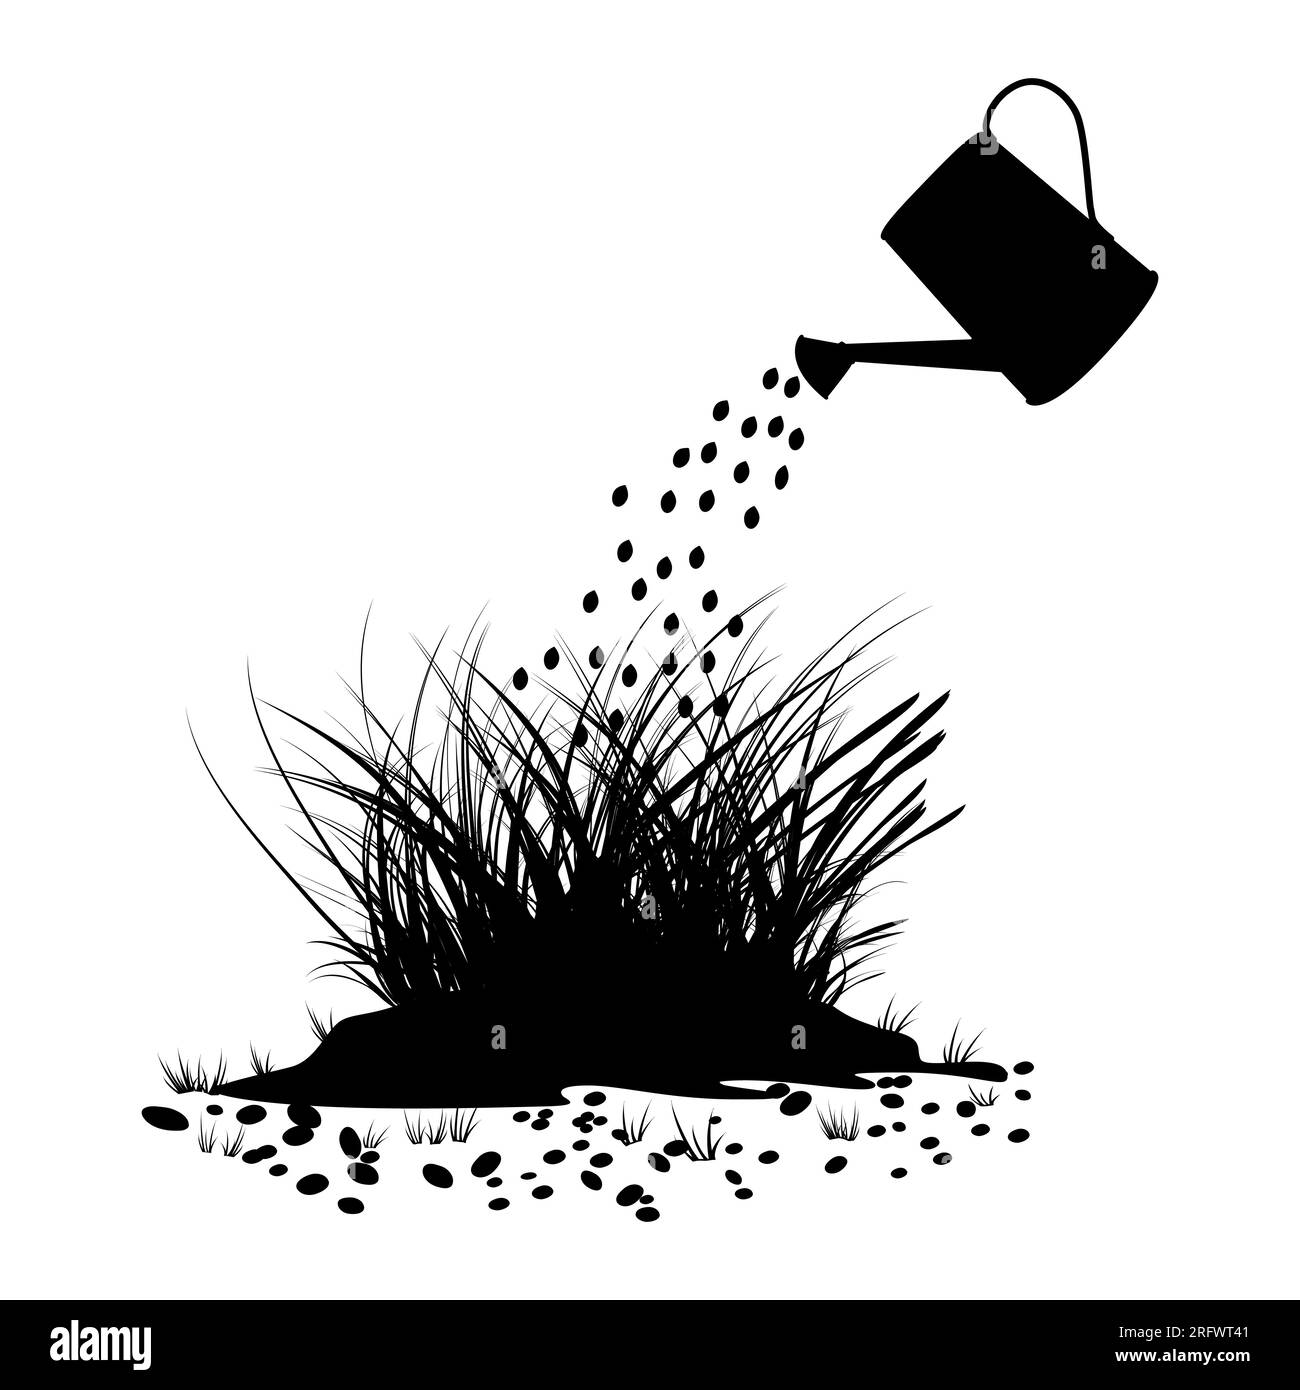 Watering can and grass black silhouette.Lawn care or garden tool concept.Watering can irrigation plant.Drops of water falling of watering pot on grass Stock Vector